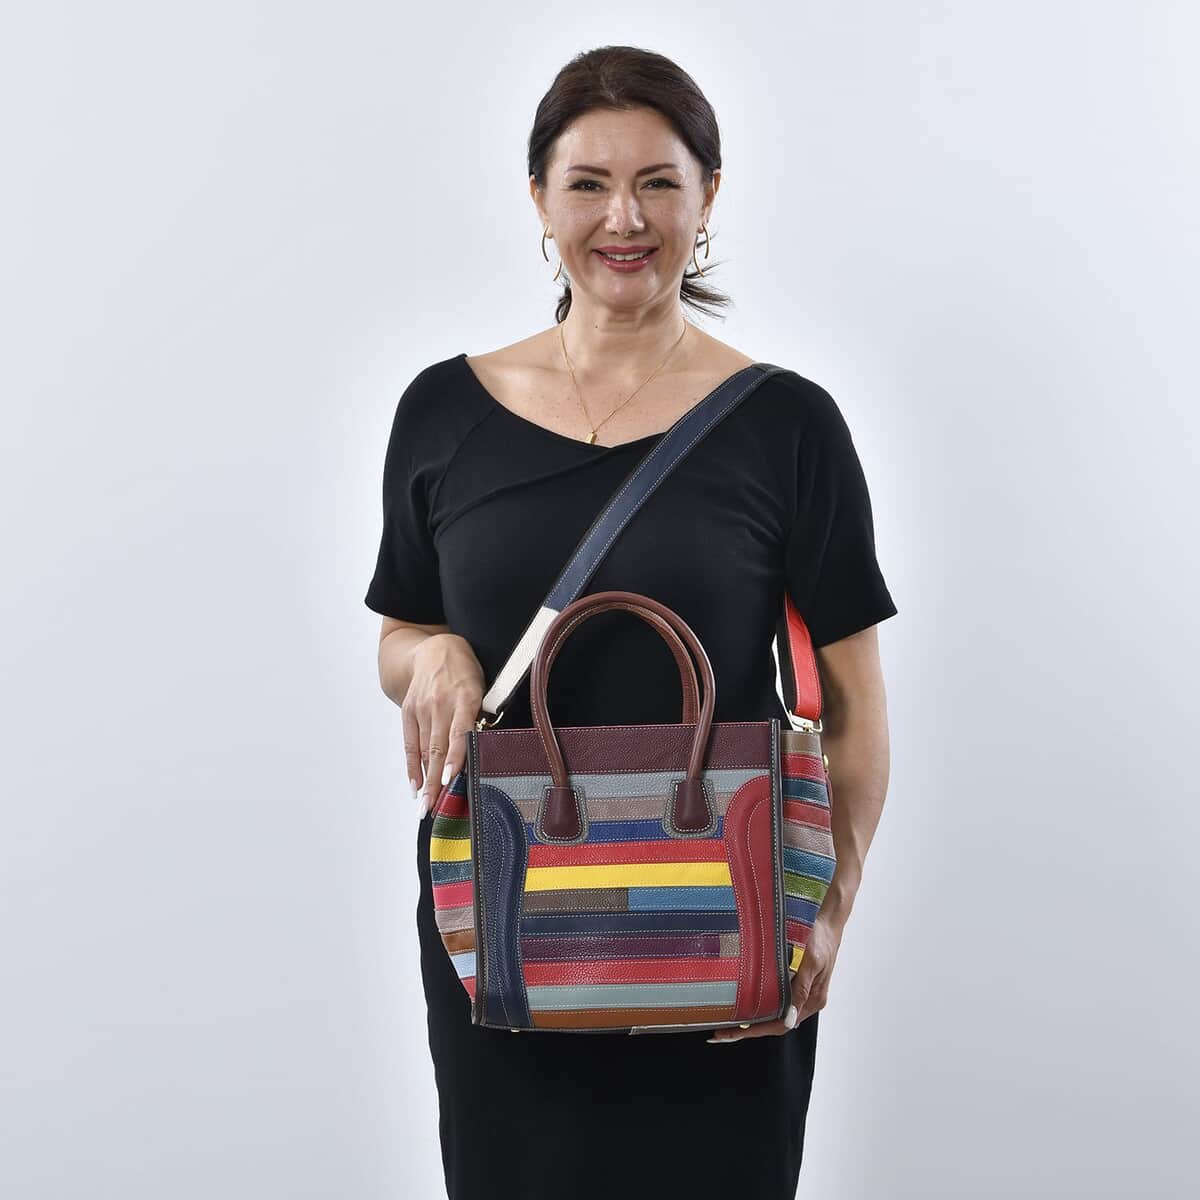 CHAOS Rainbow Color Patchwork Genuine Leather Convertible Tote Bag (19.69"x7.87"x11.02") with Long Shoulder Strap image number 1